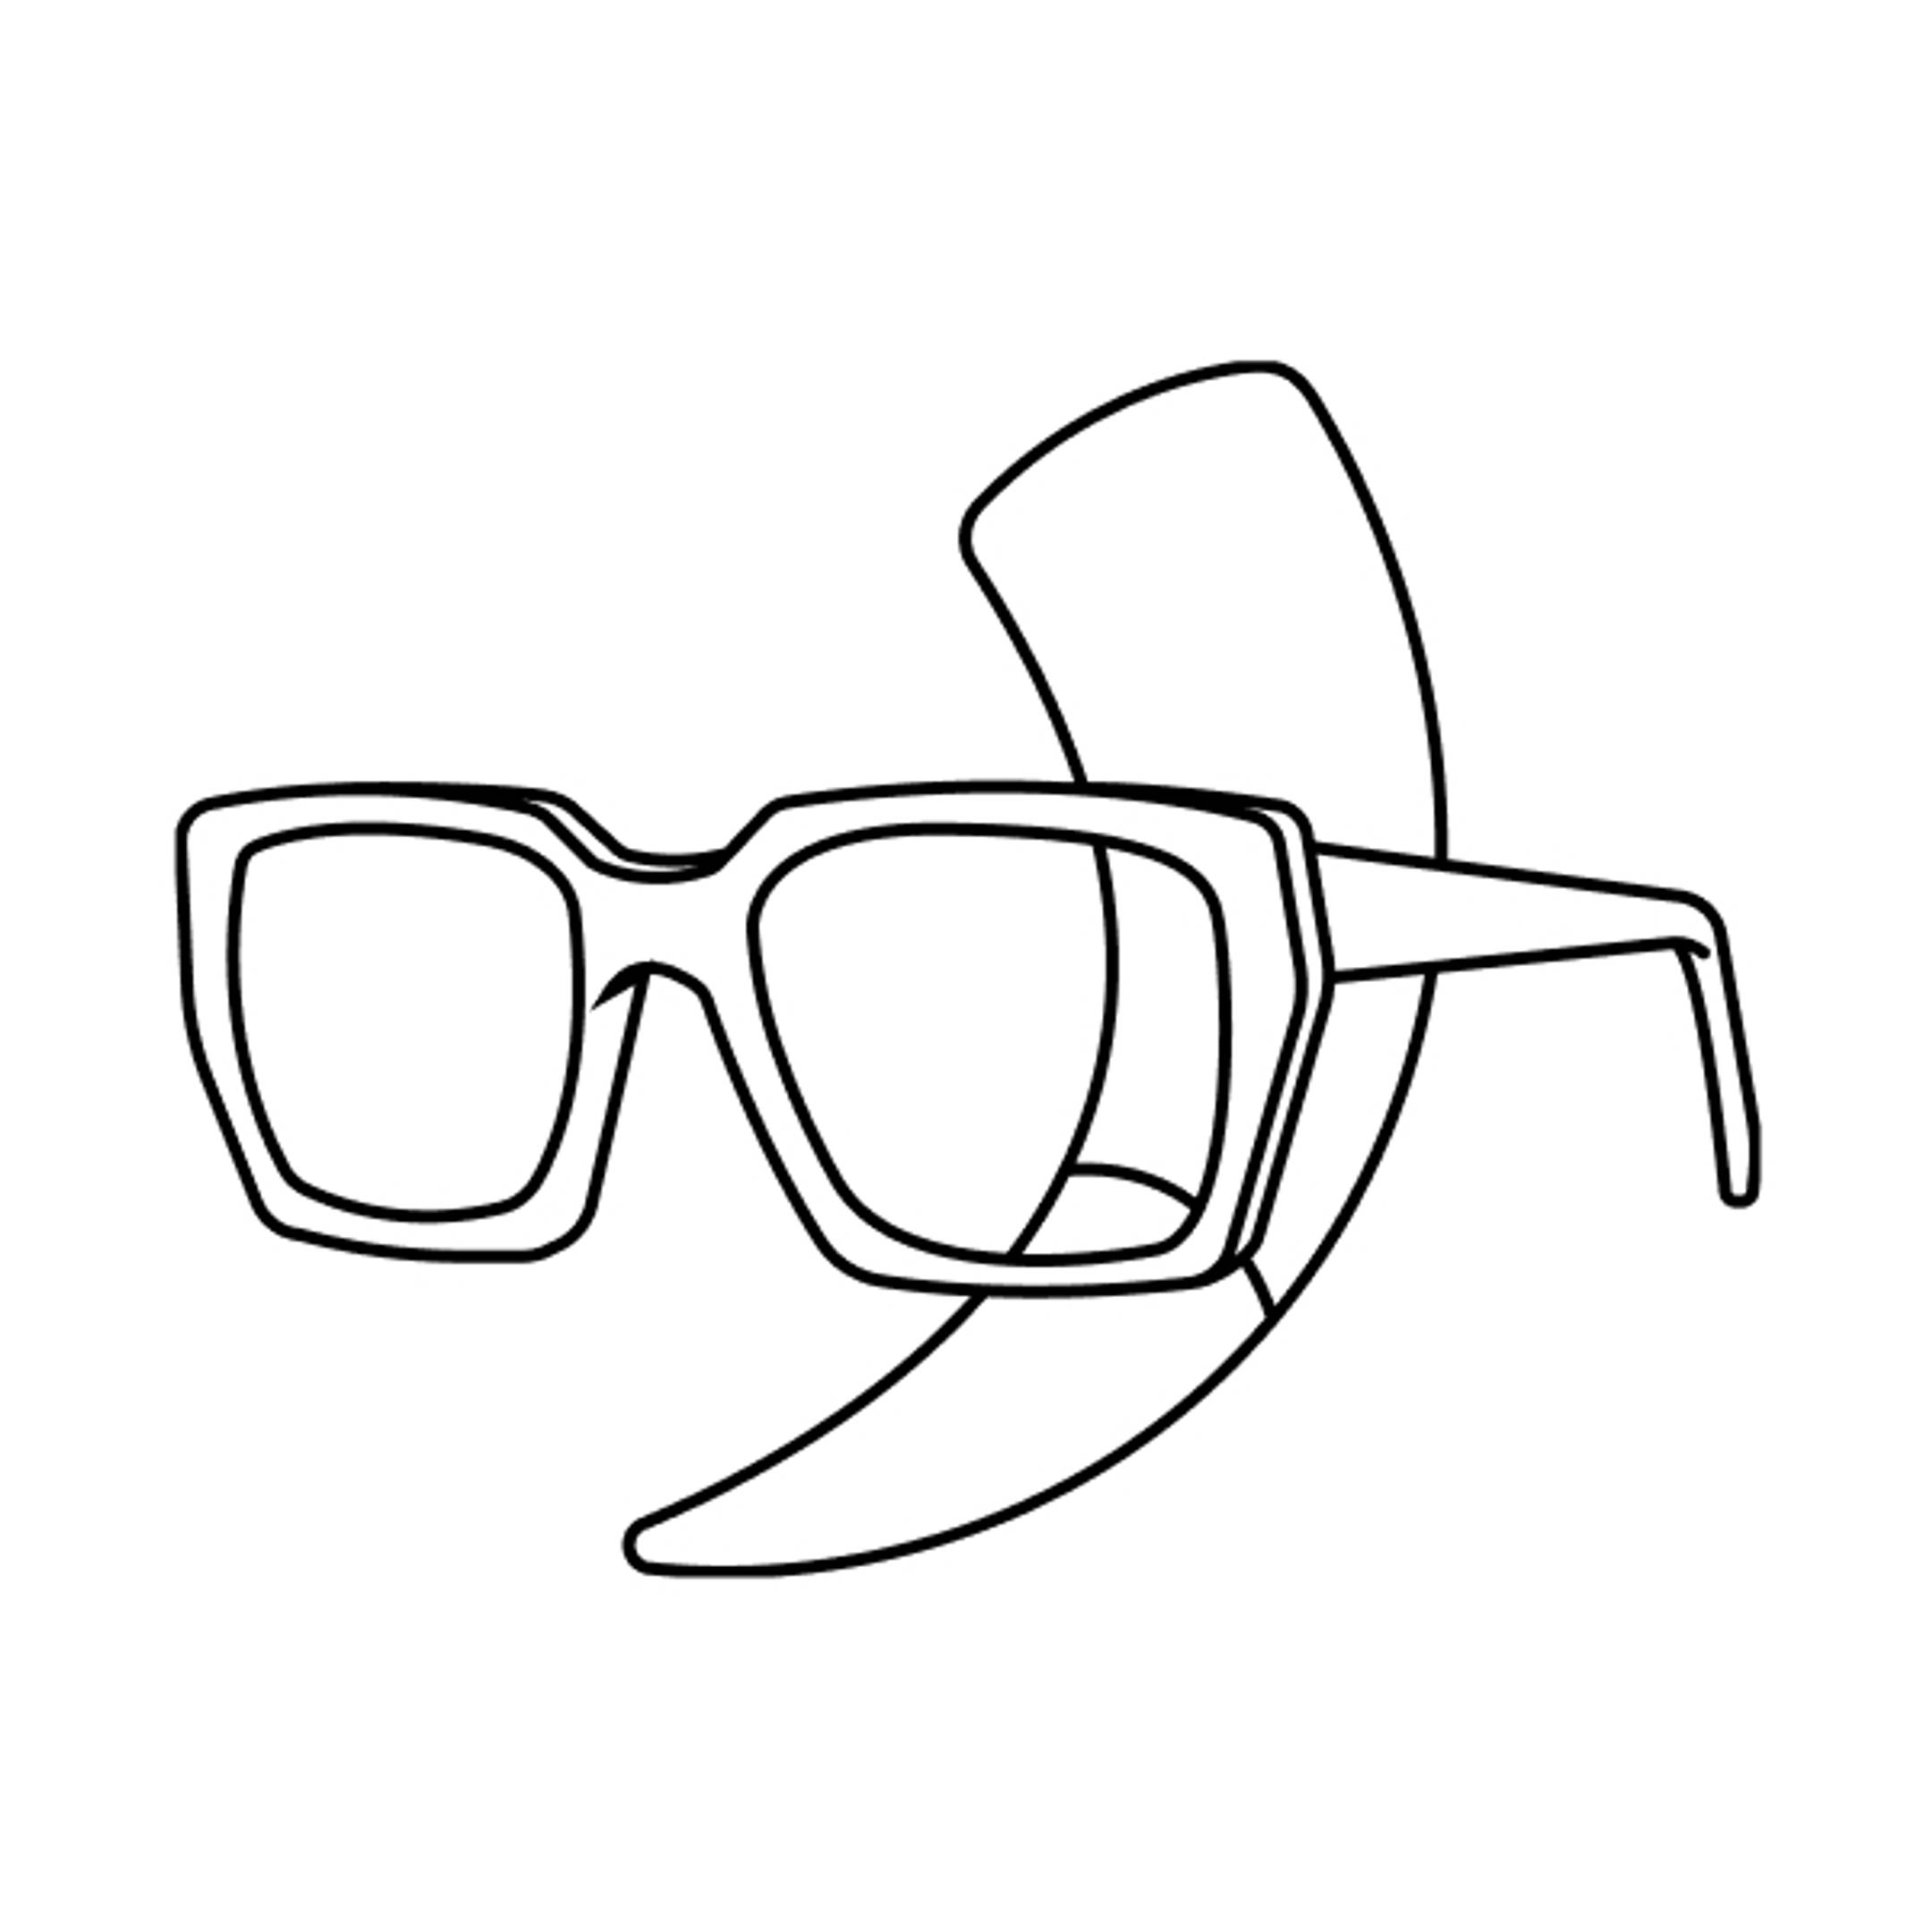 Animated drawing of eyeglasses with buffalo horn